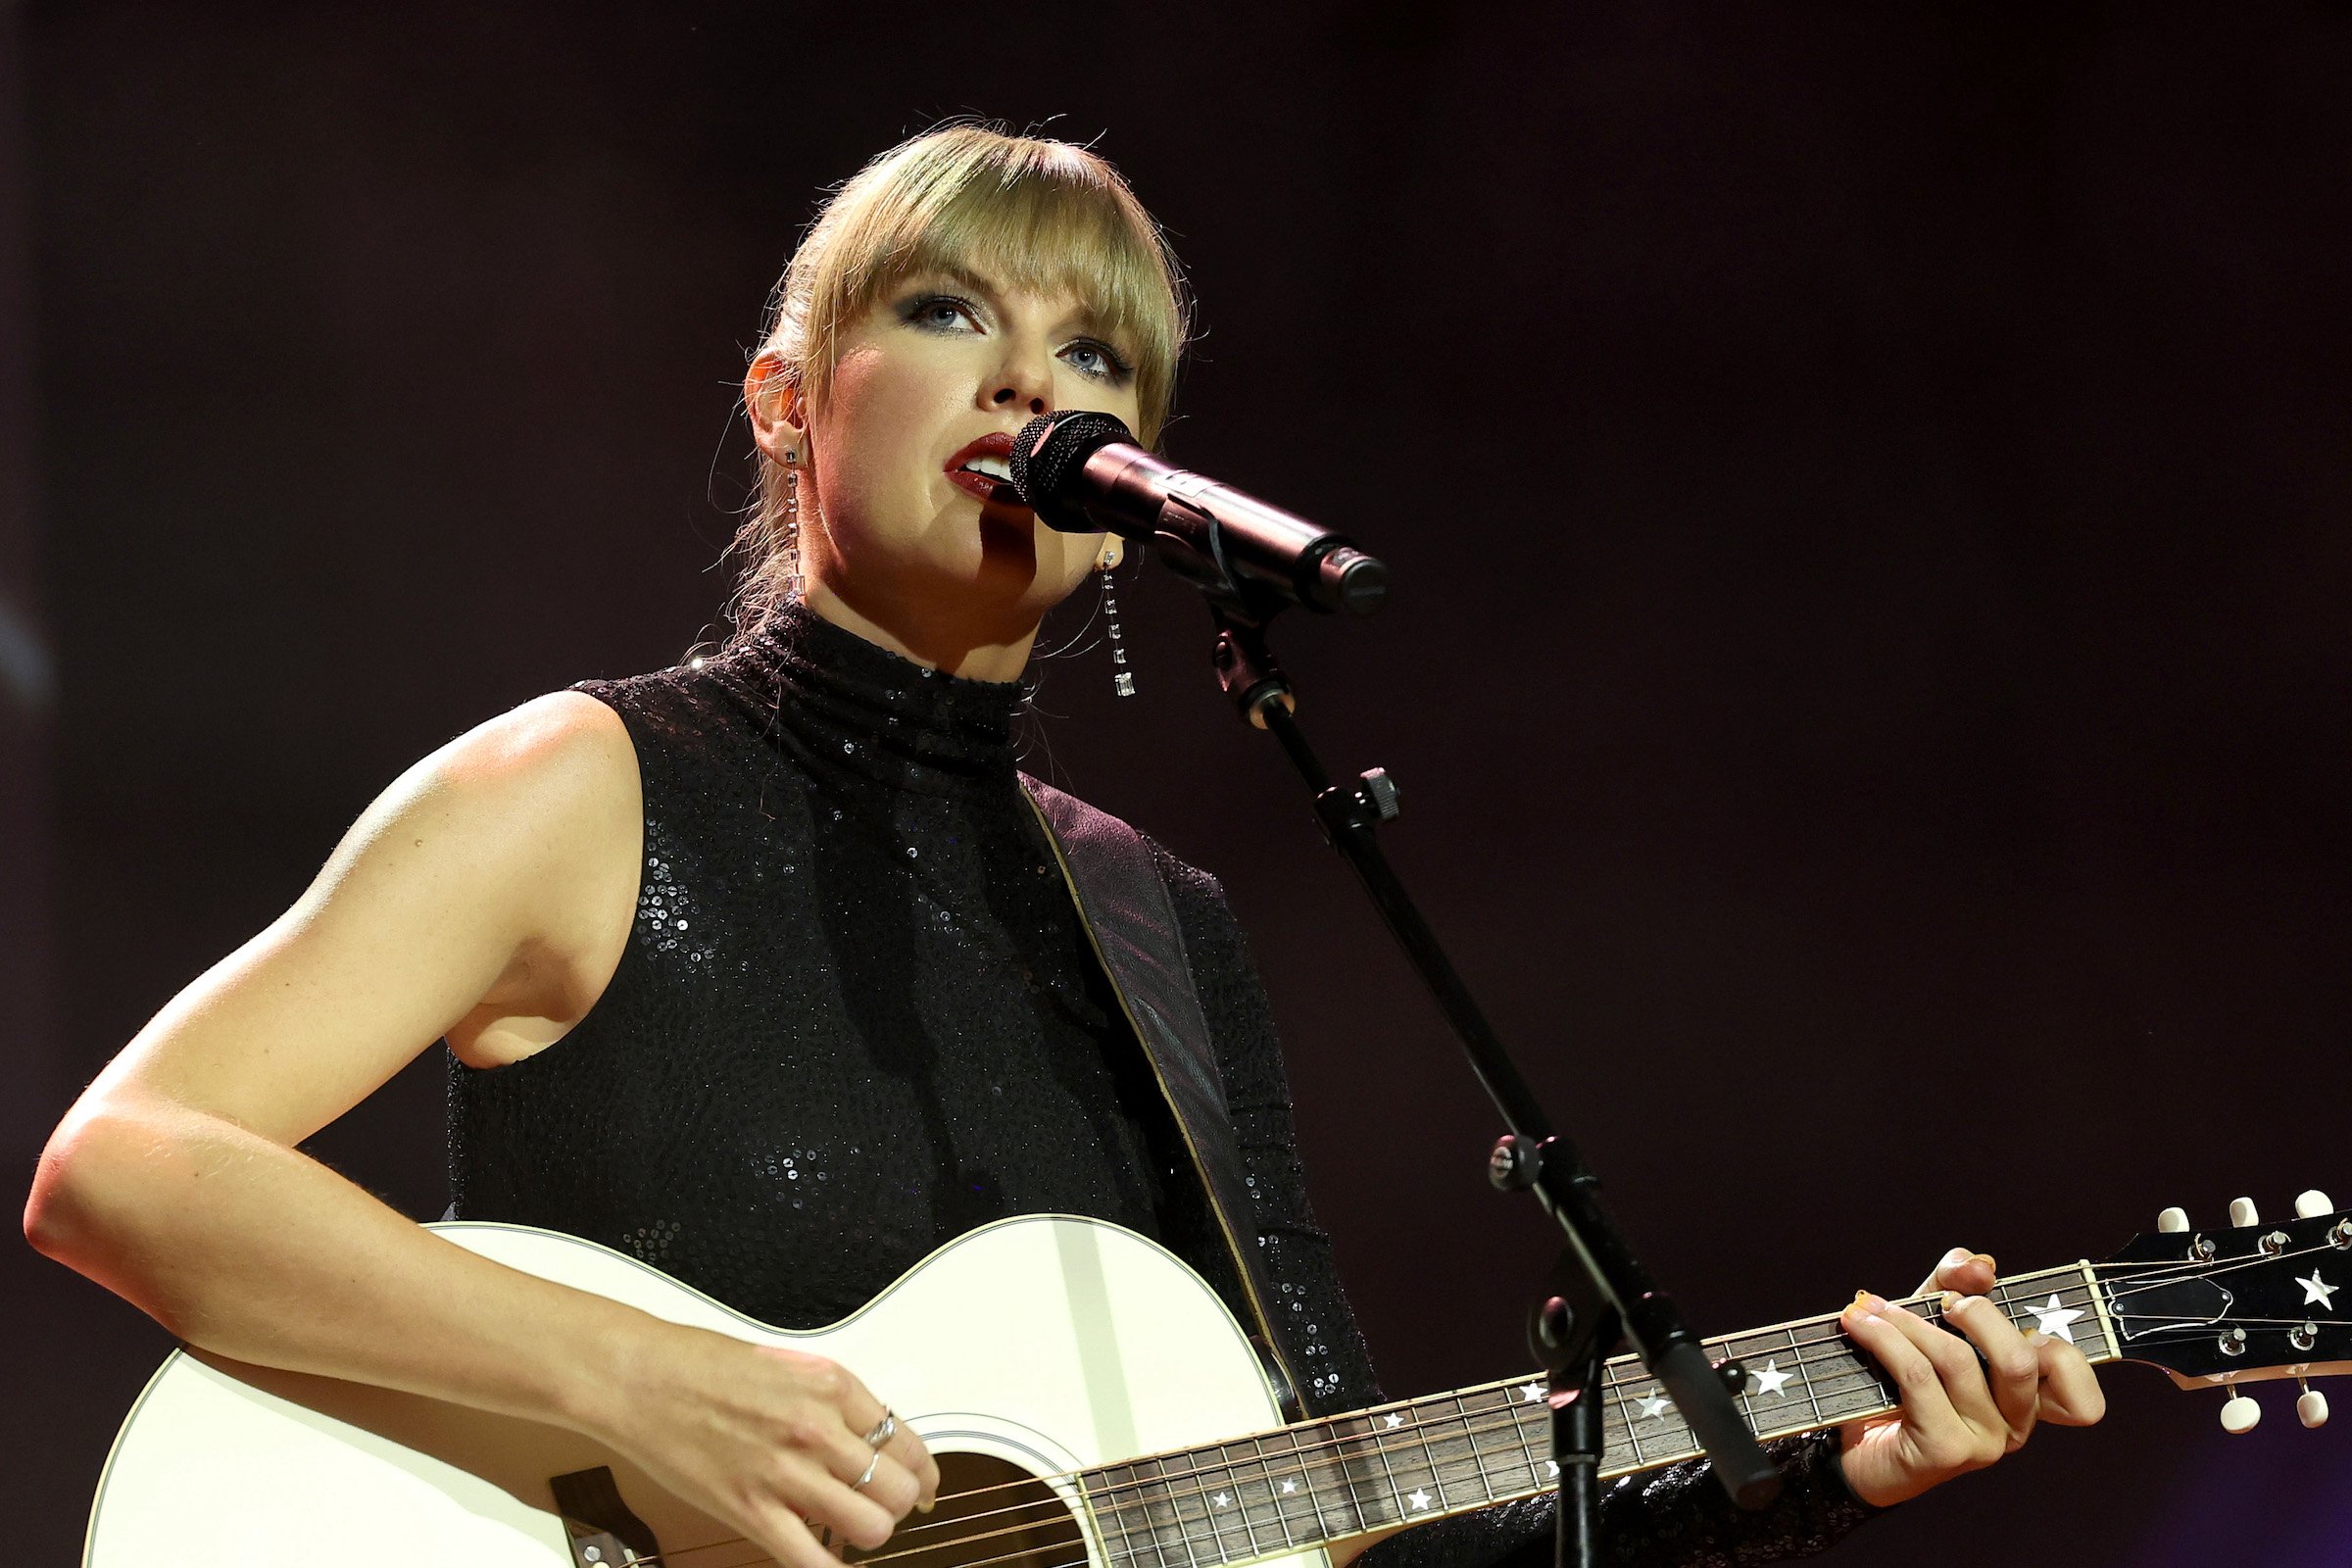 Taylor Swift Reportedly Turned Down the Super Bowl Halftime Show to Focus on Re-Recording Her Old Albums